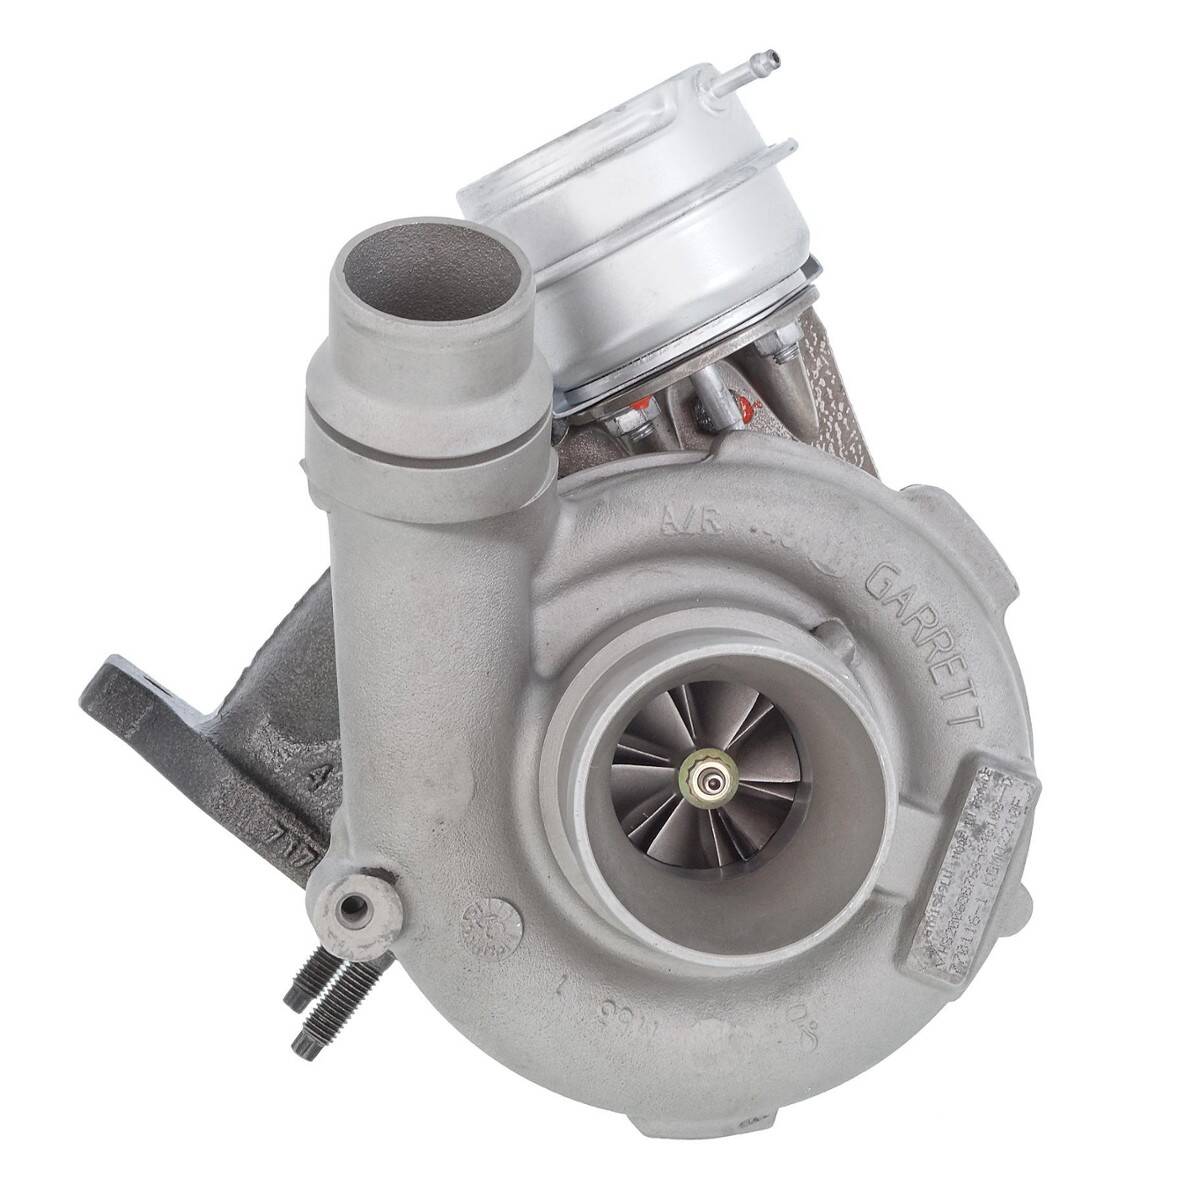 TURBOCHARGER TURBO REMANUFACTURED 770116-0001 770116-5002S 770116-0001